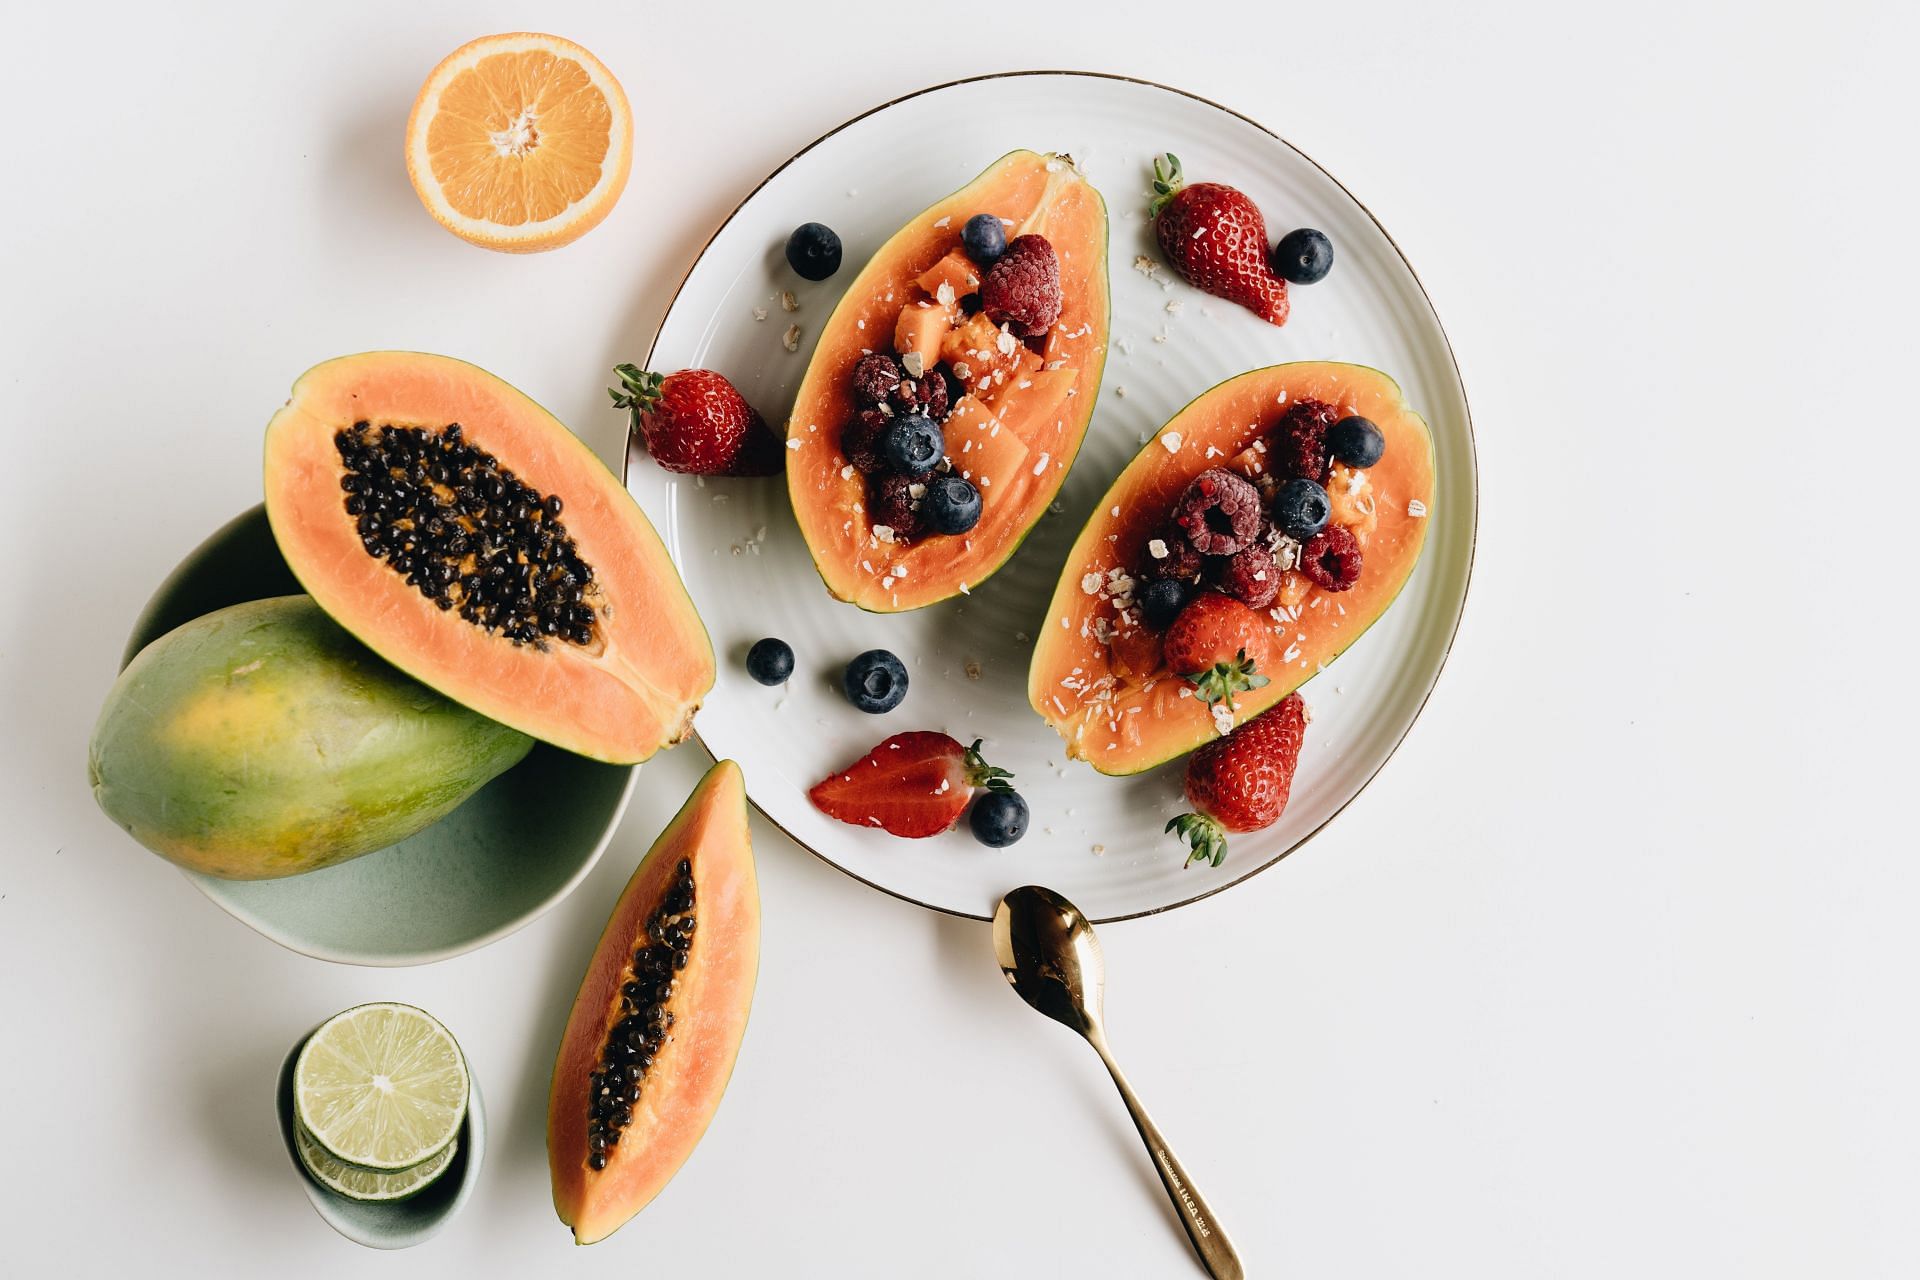 Papayas are rich in folic acid which promotes heart health (Image via Pexels)